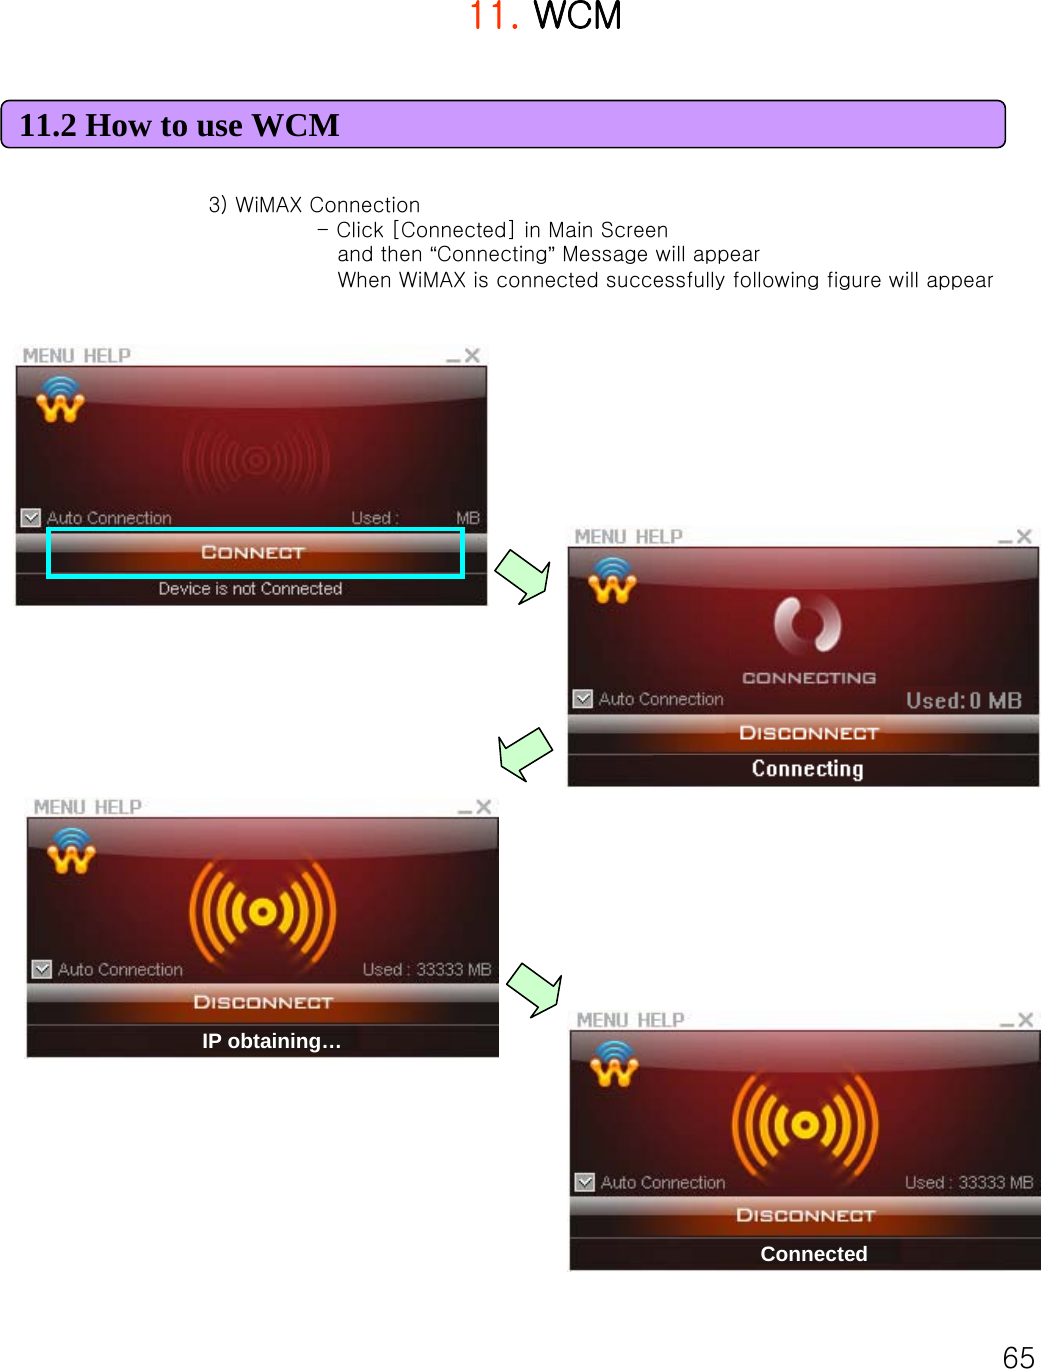 6511. WCM11.2 How to use WCM3) WiMAX Connection - Click [Connected] in Main Screenand then “Connecting”Message will appearWhen WiMAX is connected successfully following figure will appearIP obtaining…Connected